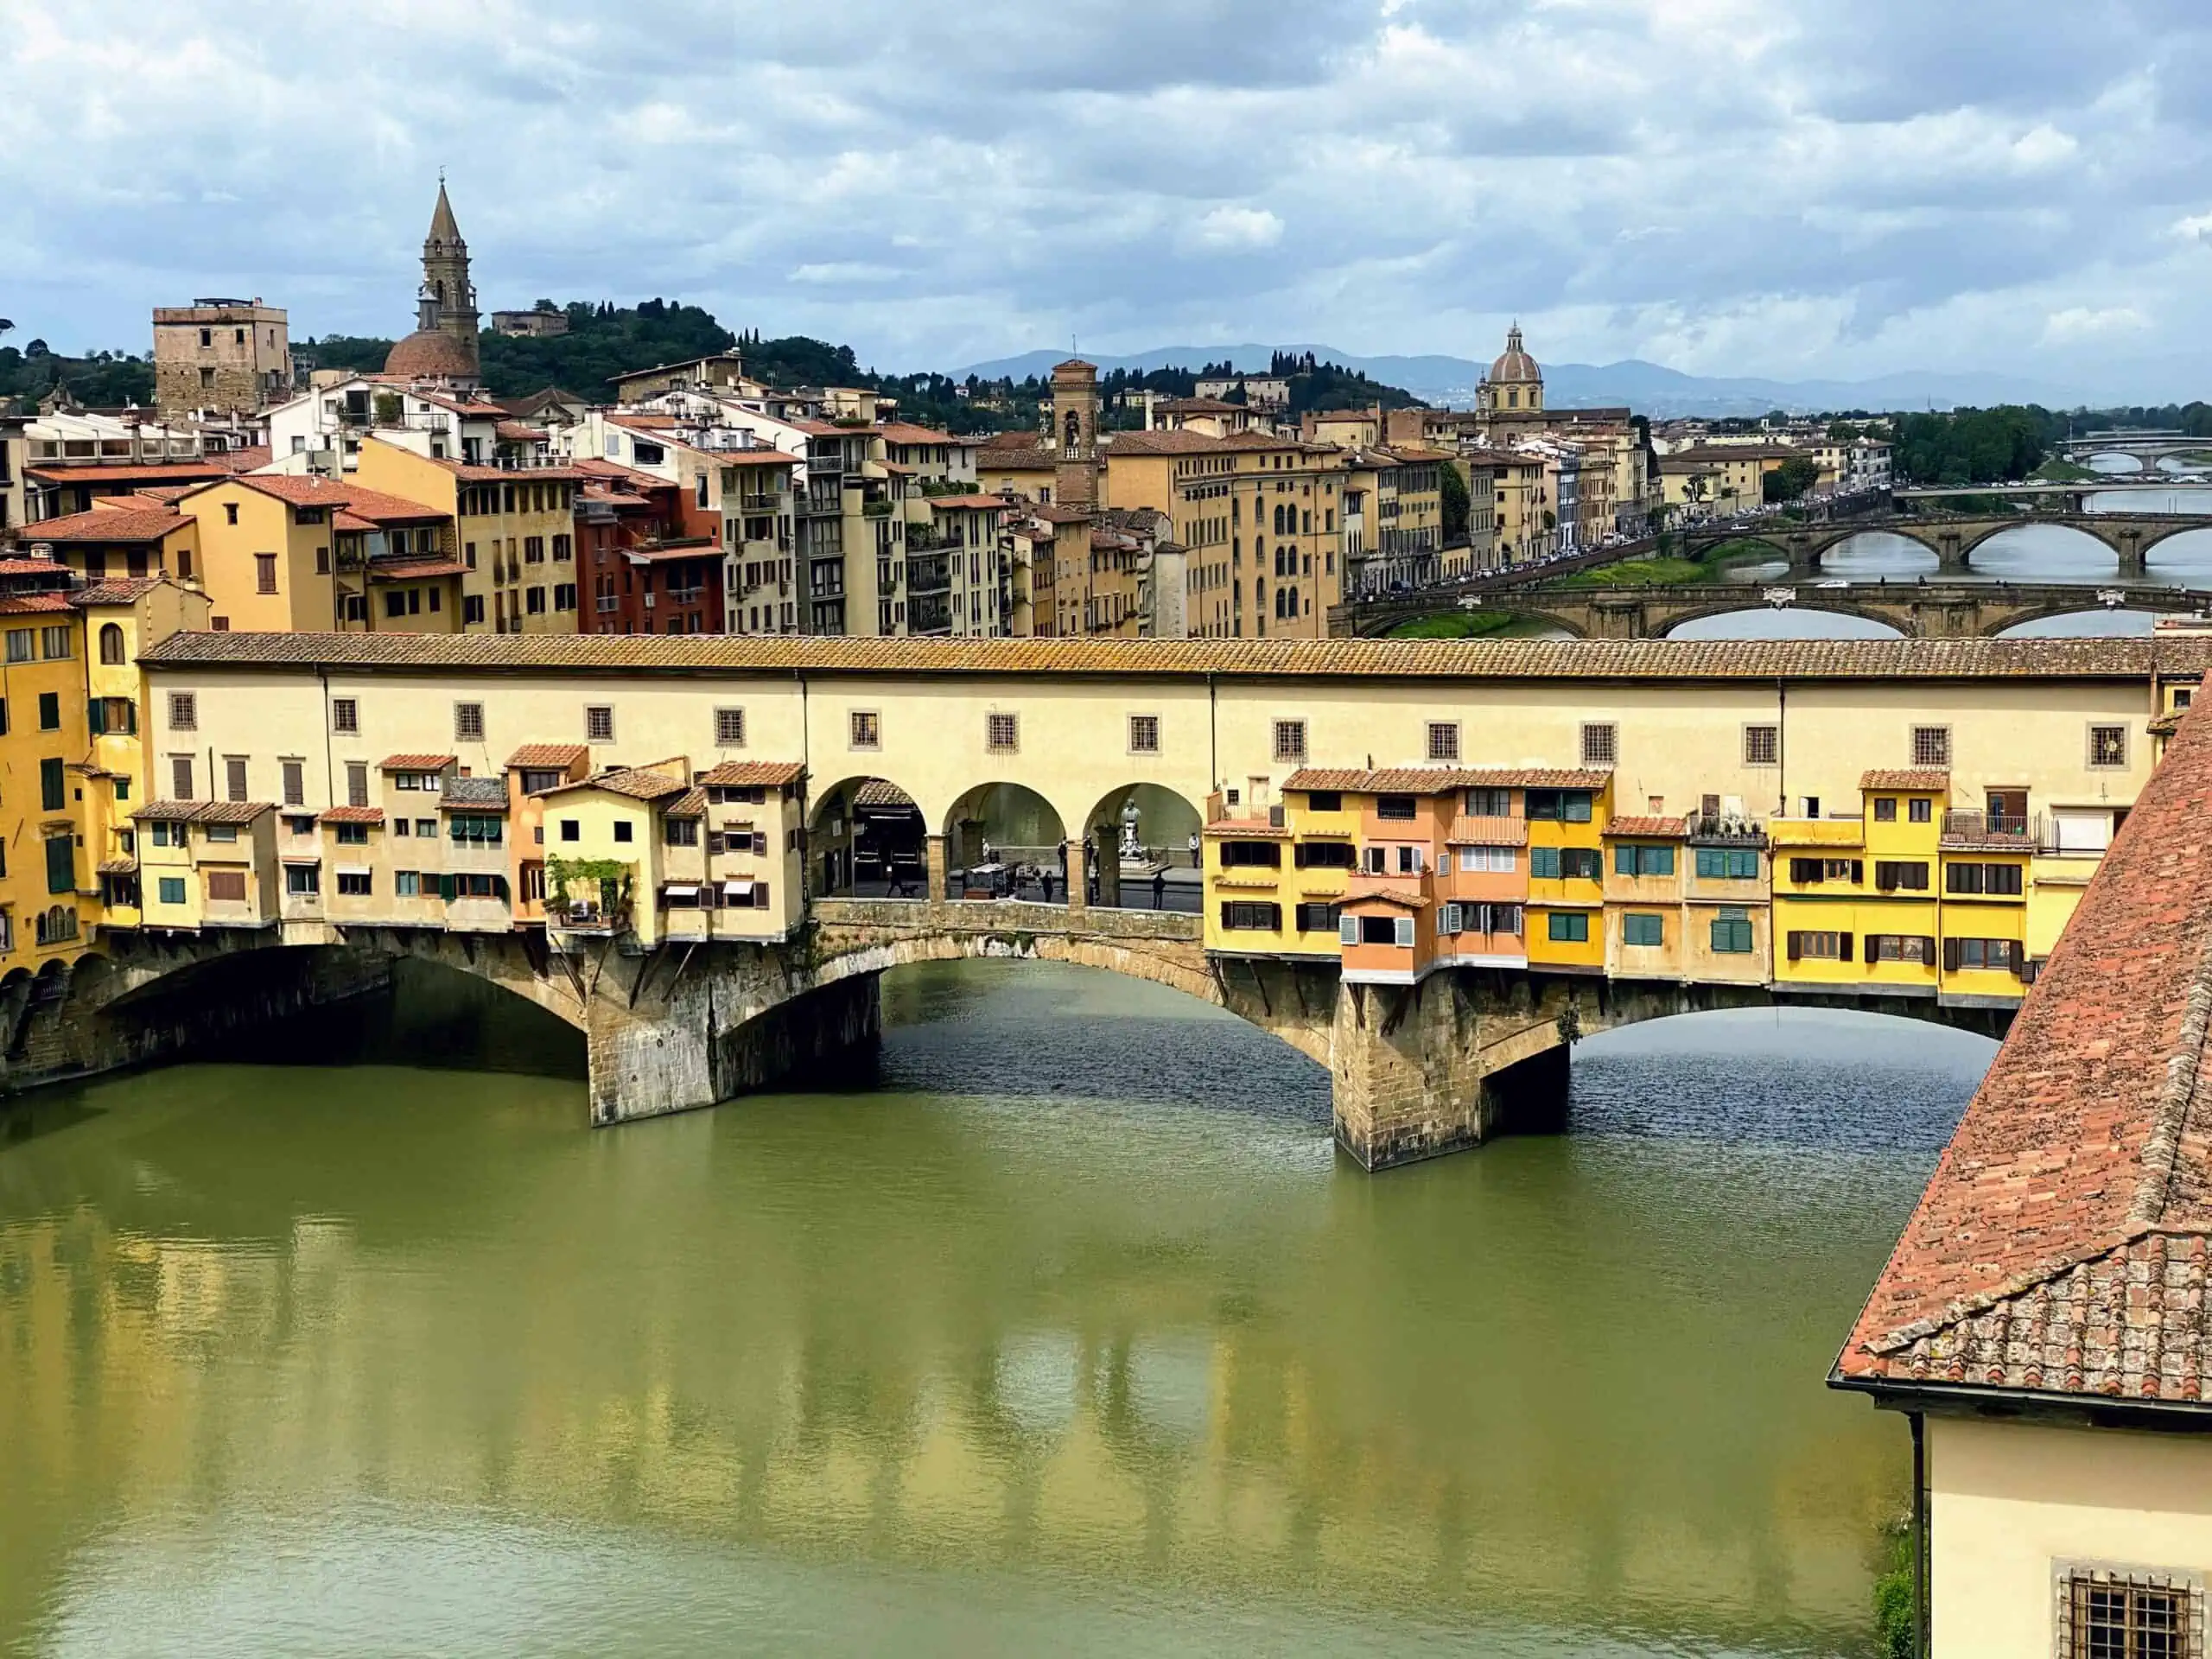 View of Ponte Vecchio from upper floor of Uffizi Gallery in Florence.